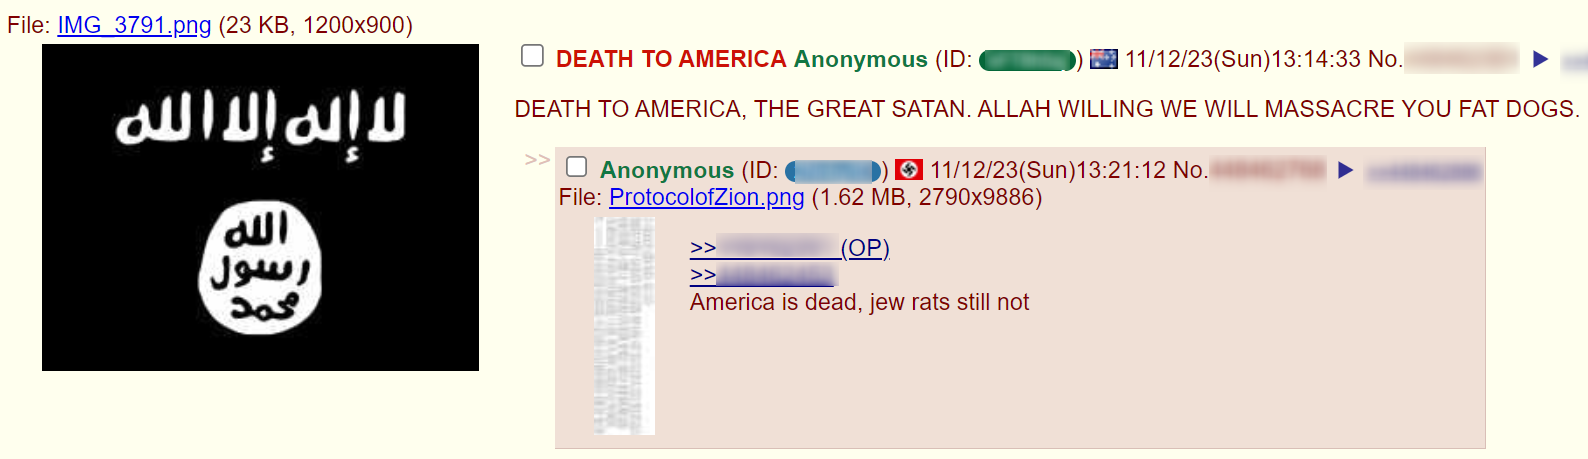 An image of extremist anti-Jewish and anti-American post by supporters of ISIS and Nazisms on 4chan